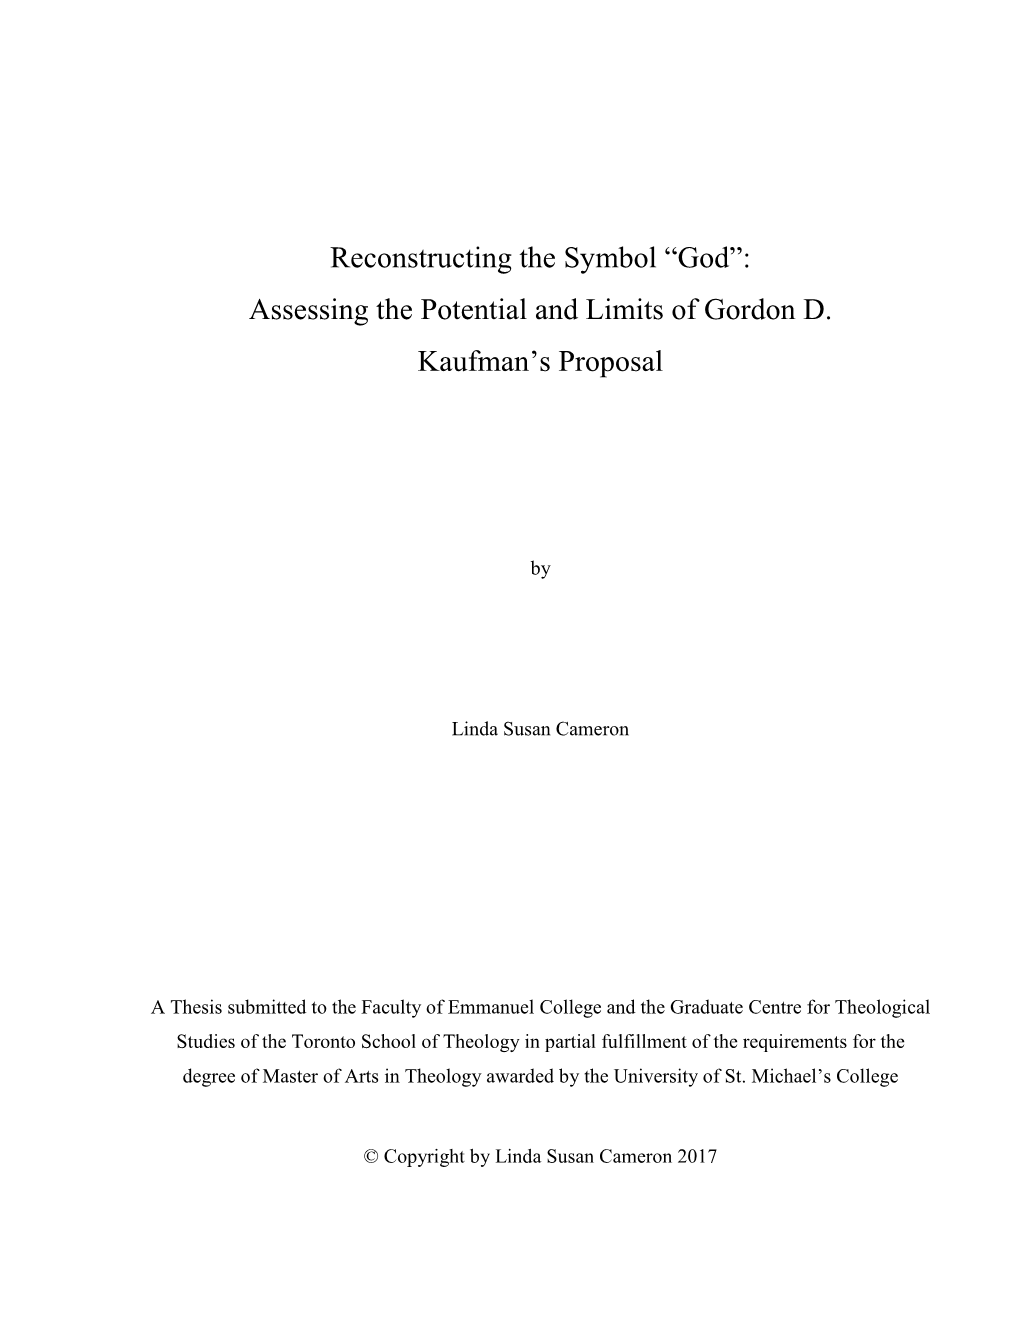 Reconstructing the Symbol “God”: Assessing the Potential and Limits of Gordon D